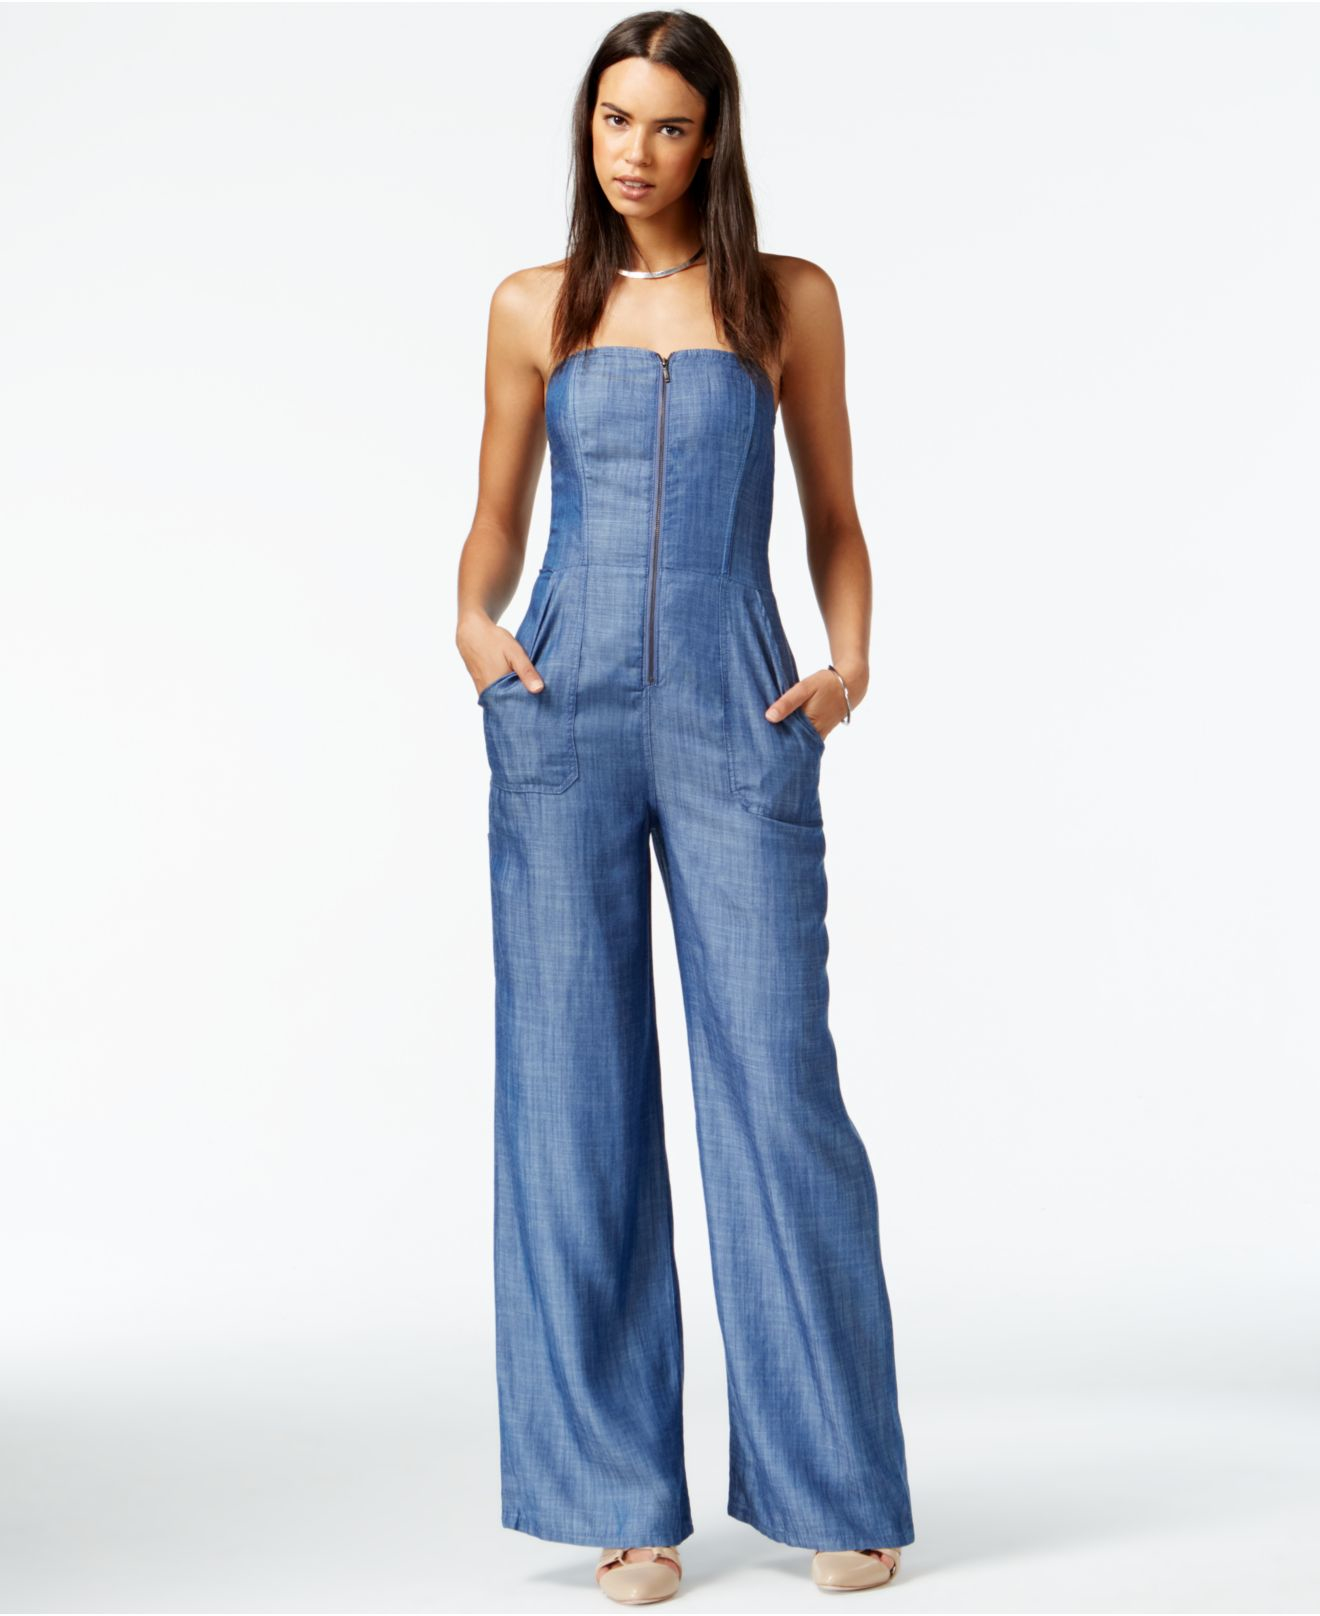 Opinions on this denim jump suit?